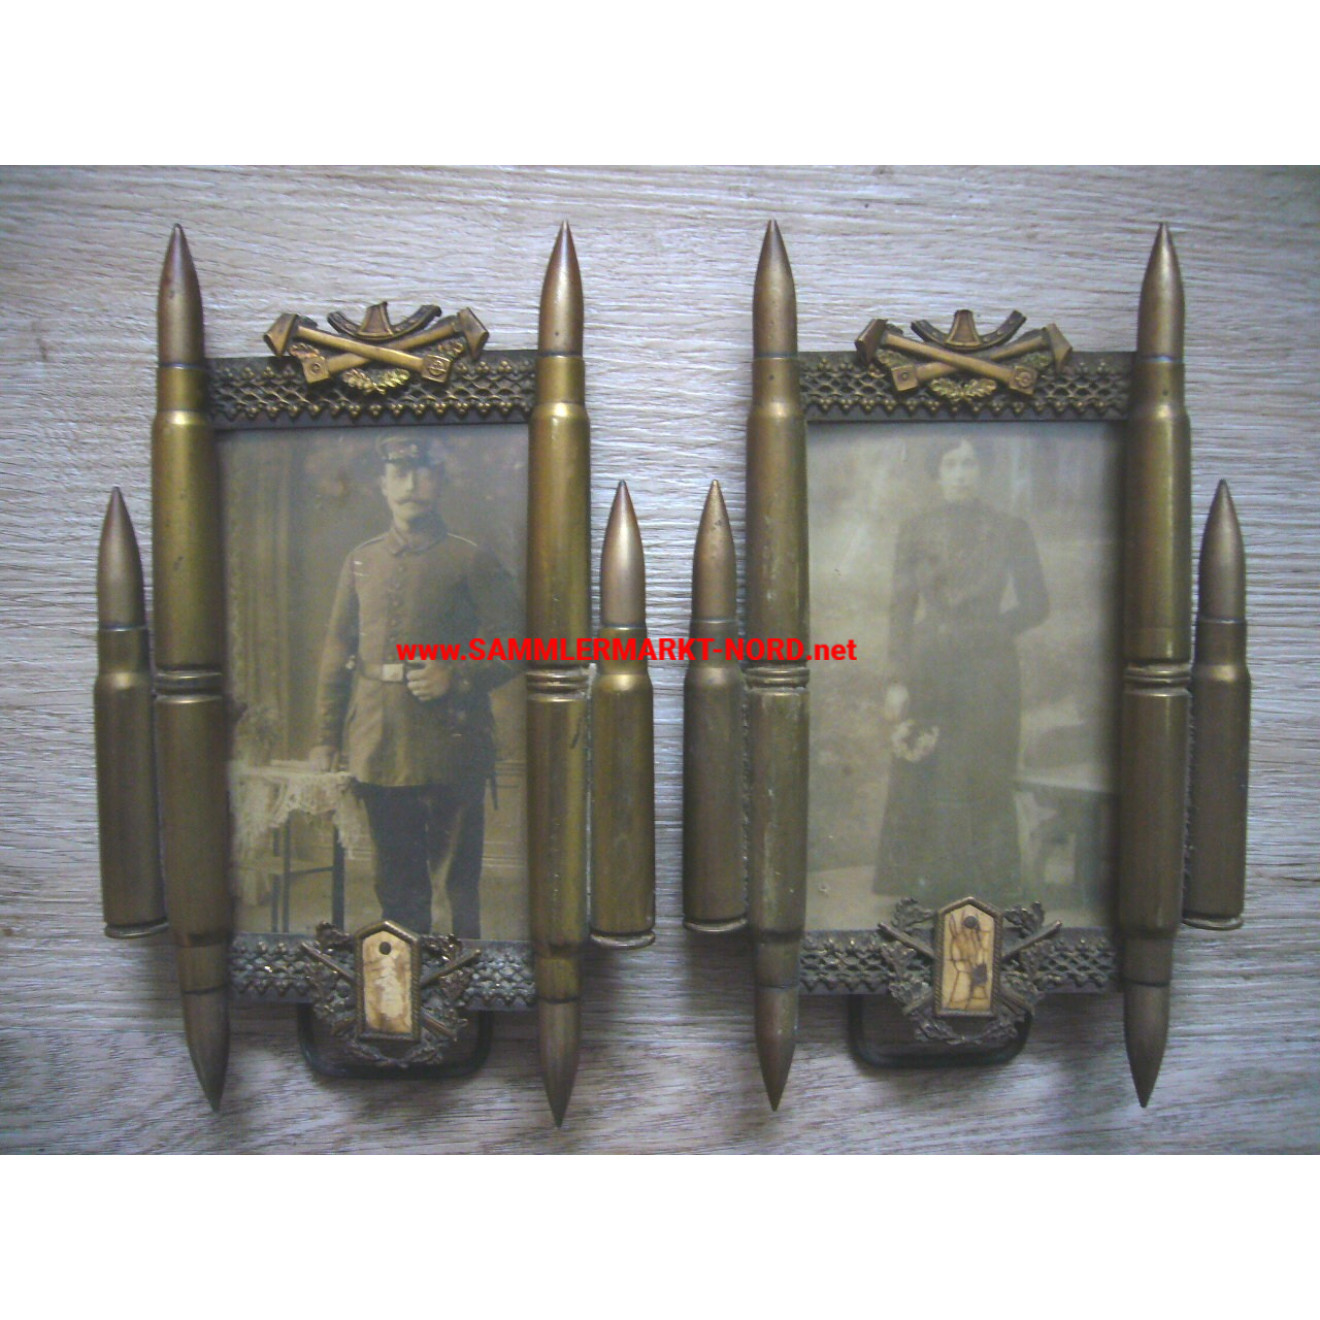 2 x Patriotic picture frame made from rifle cartridges